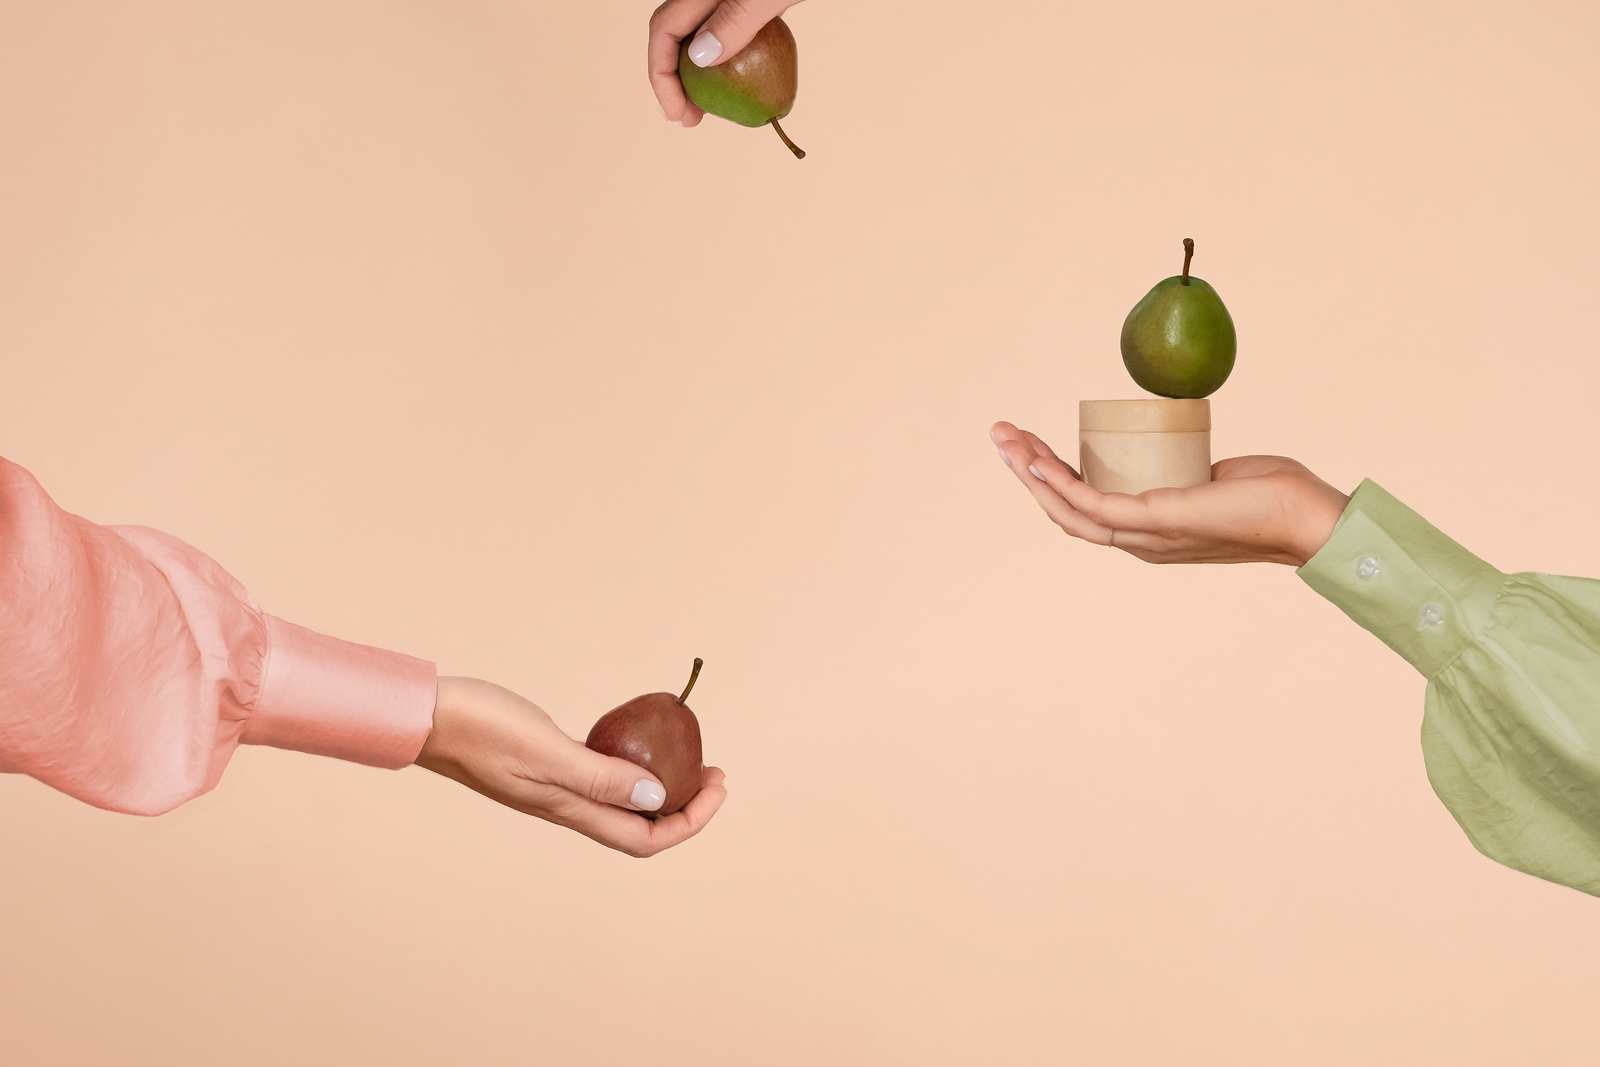 Product photo with a woman model presenting pears and a jar of cosmetic cream styled by Jenni Joanna Visuals.